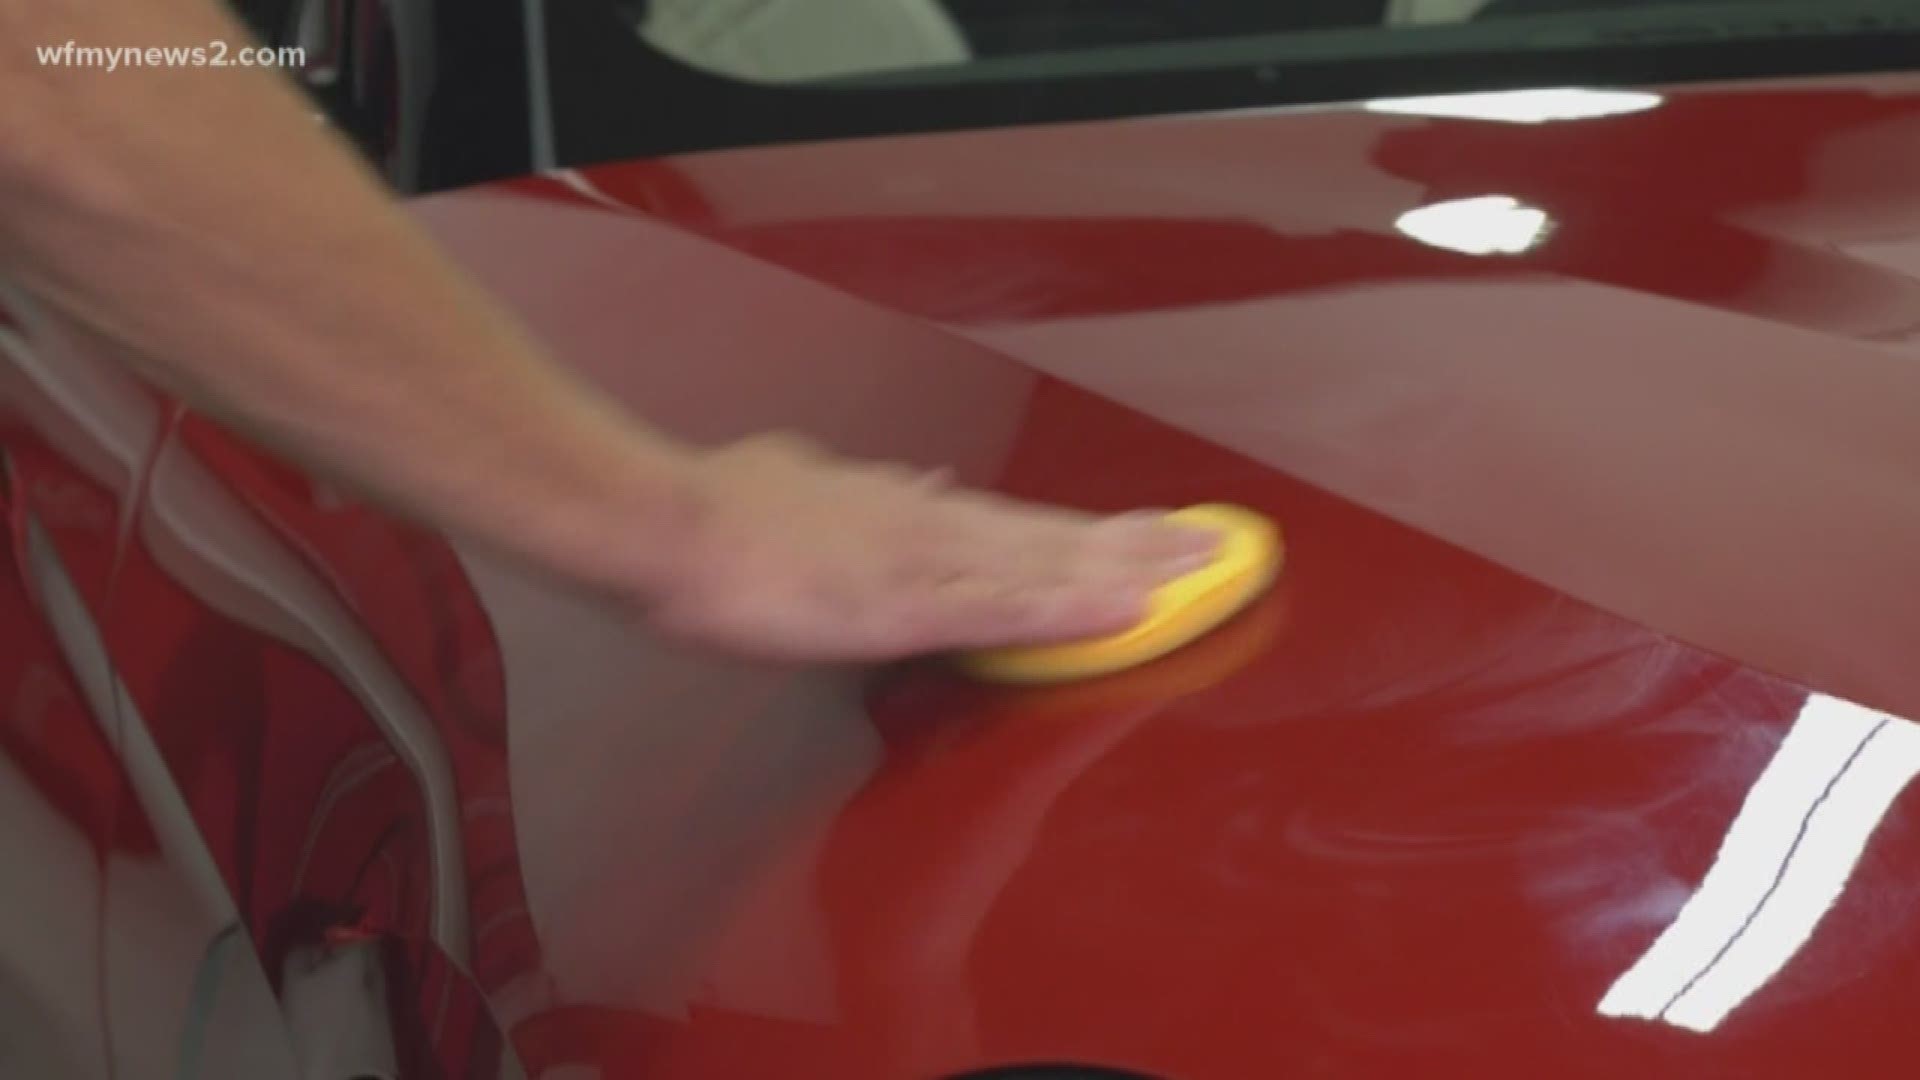 You can protect your car by cleaning and waxing it throughout the year. Question is – do you know how often you should clean your car, or the proper way to wax it?